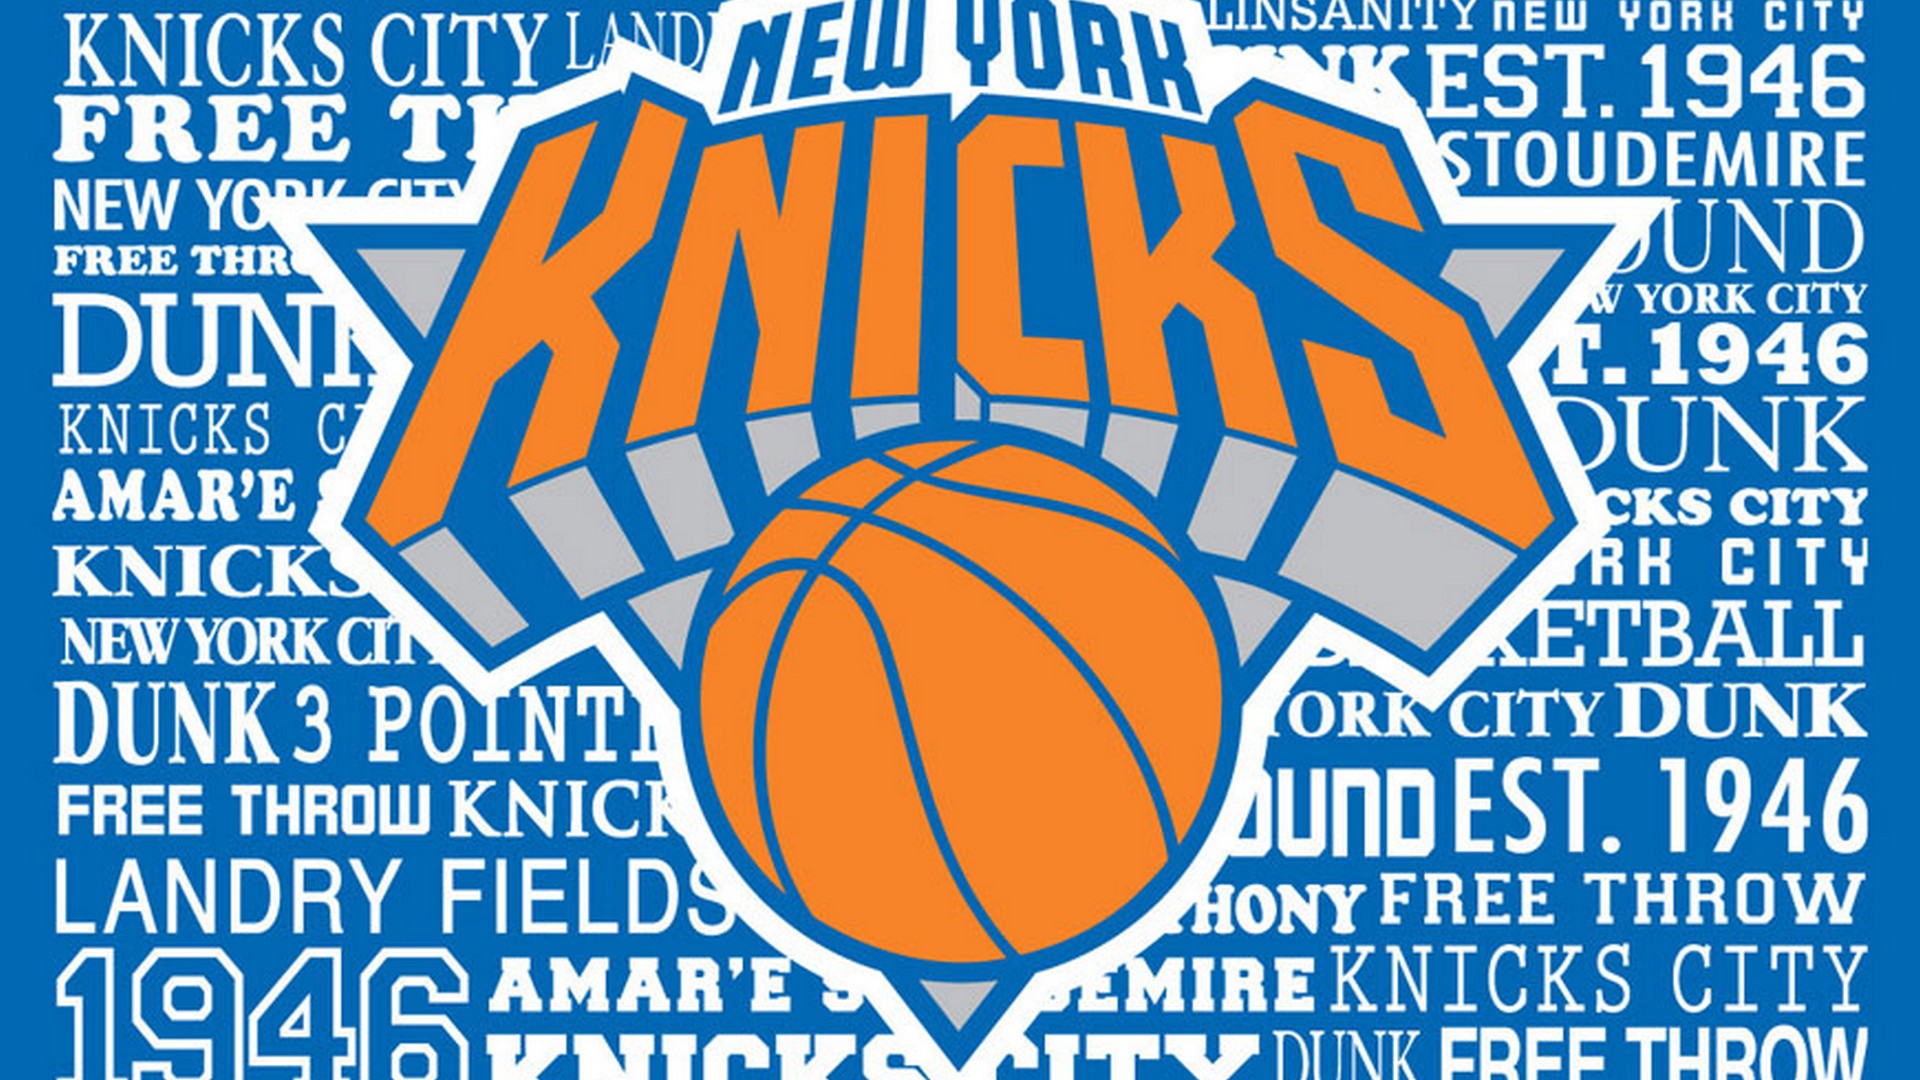 HD Backgrounds New York Knicks with image dimensions 1920x1080 pixel. You can make this wallpaper for your Desktop Computer Backgrounds, Windows or Mac Screensavers, iPhone Lock screen, Tablet or Android and another Mobile Phone device